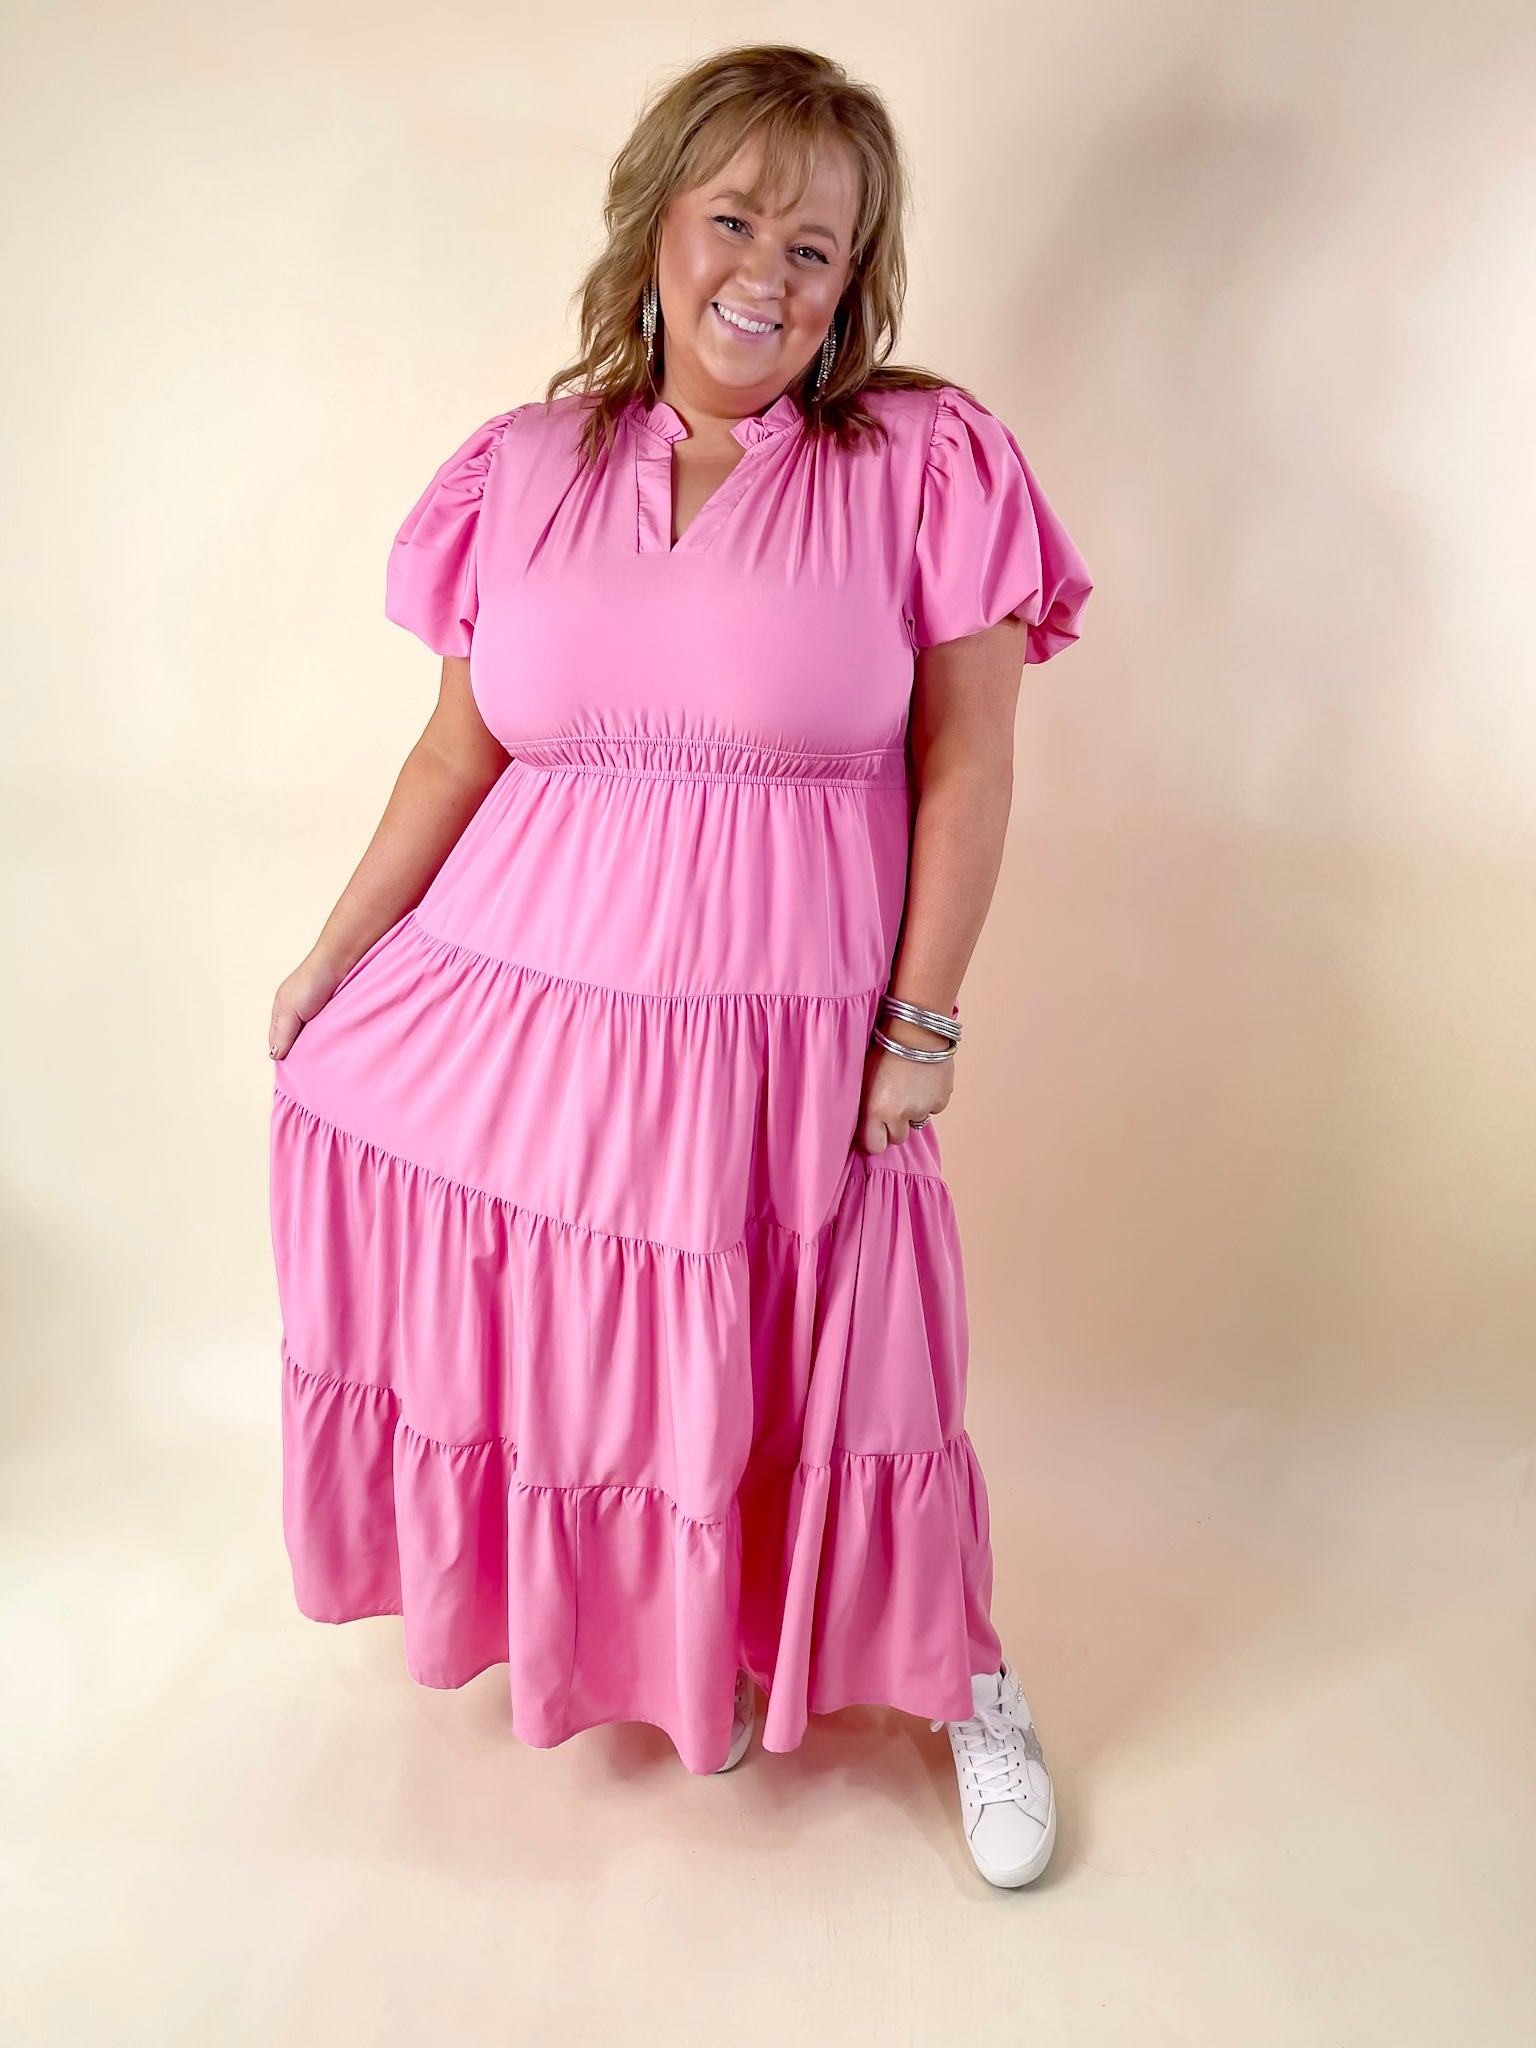 Table for Two Tiered Maxi Dress with Puff Sleeves in Bubblegum Pink - Giddy Up Glamour Boutique